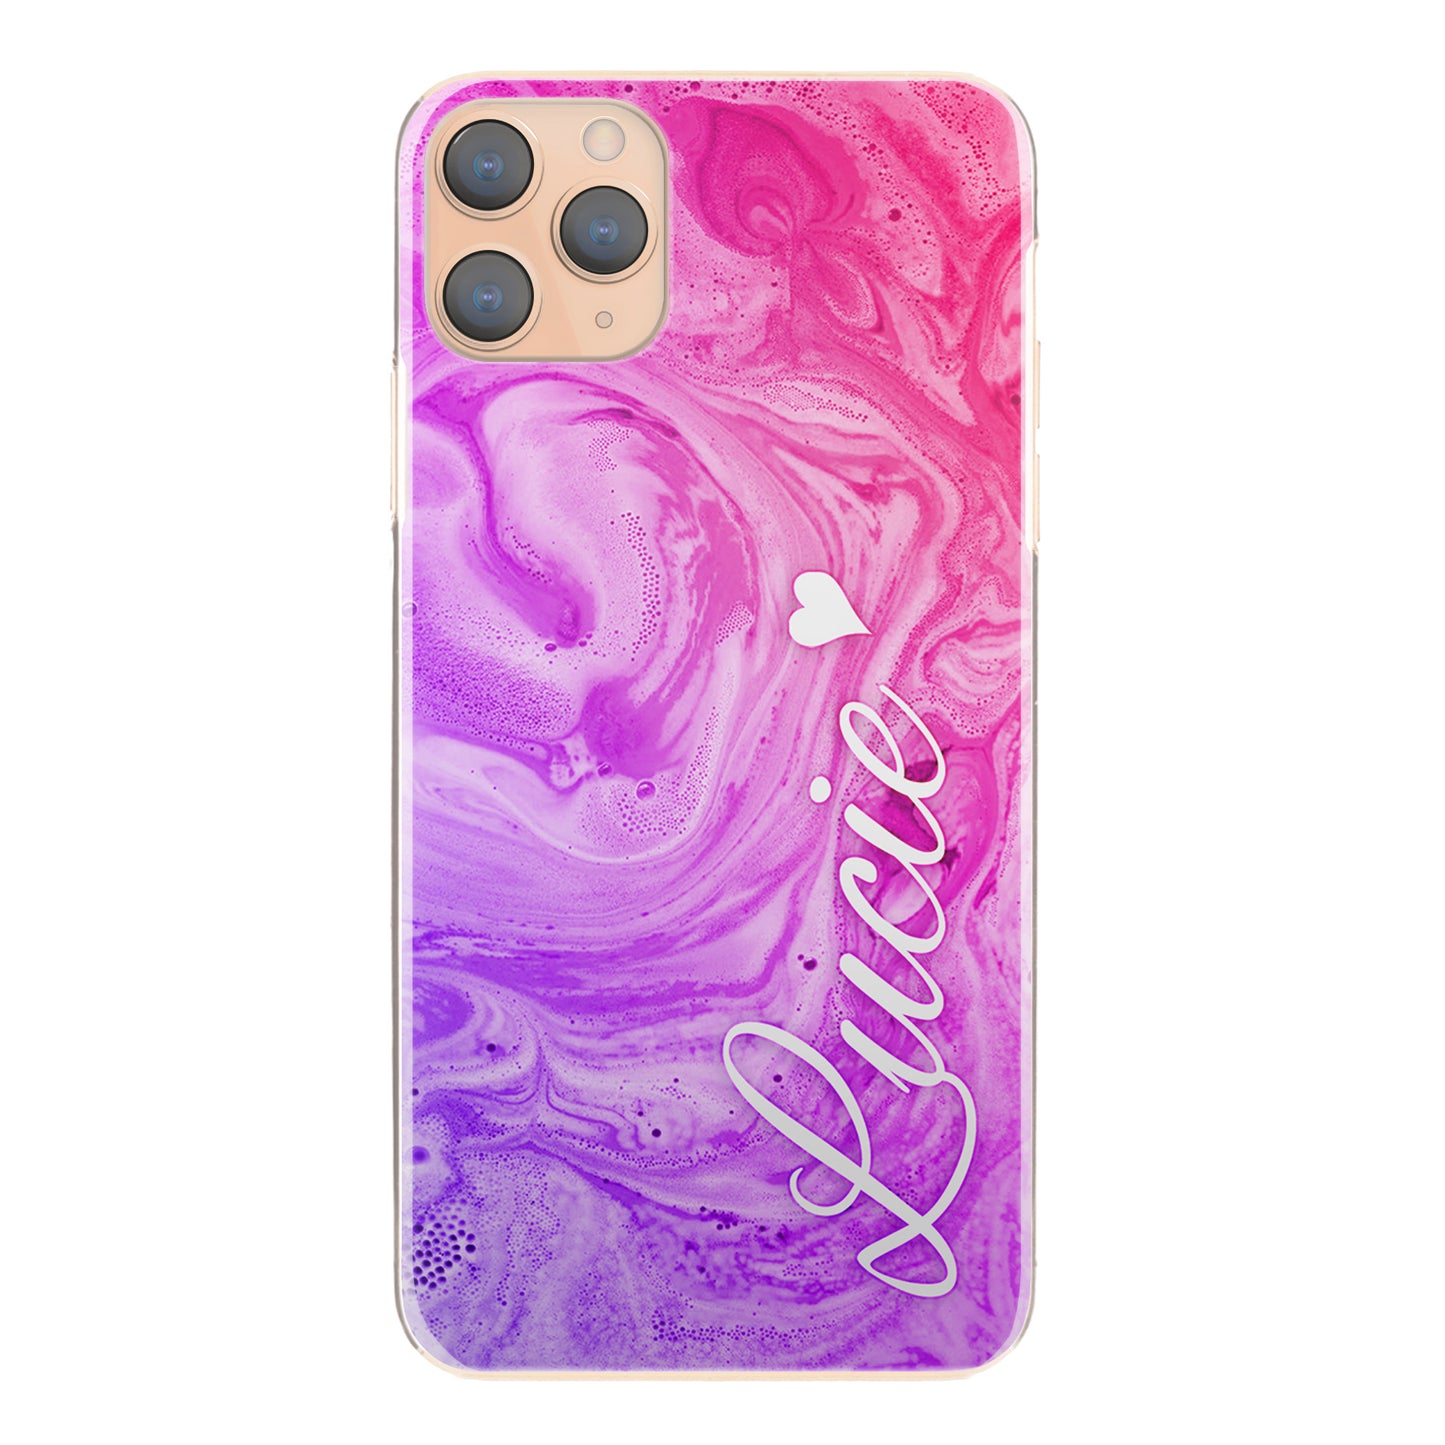 Personalised Honor Phone Hard Case with Heart Accented Text on Purple Pink Gradient Swirled Marble